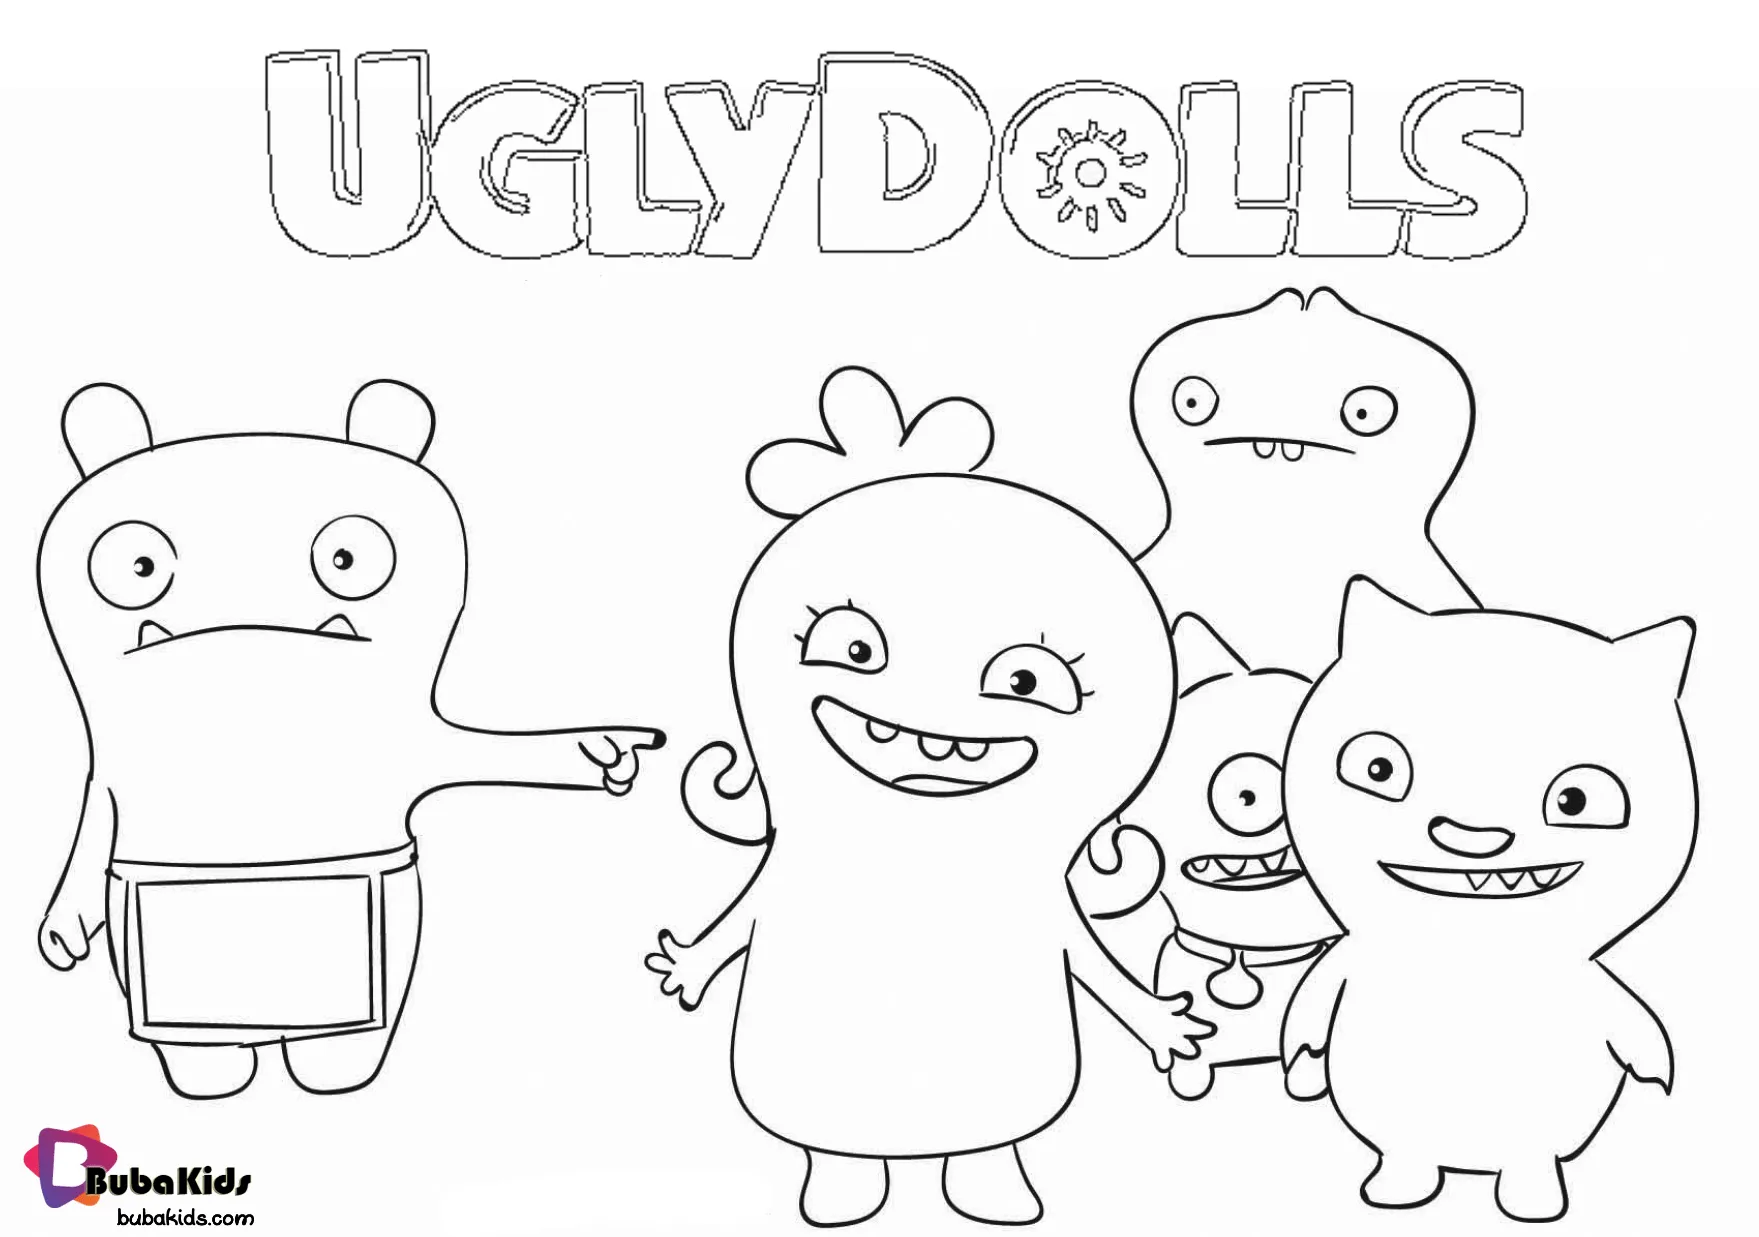 Free printable Uglydolls coloring page. coloring sheet, uglydolls  #ColoringSheet, #Uglydoll… | Cartoon coloring pages, Coloring pages  inspirational, Coloring pages